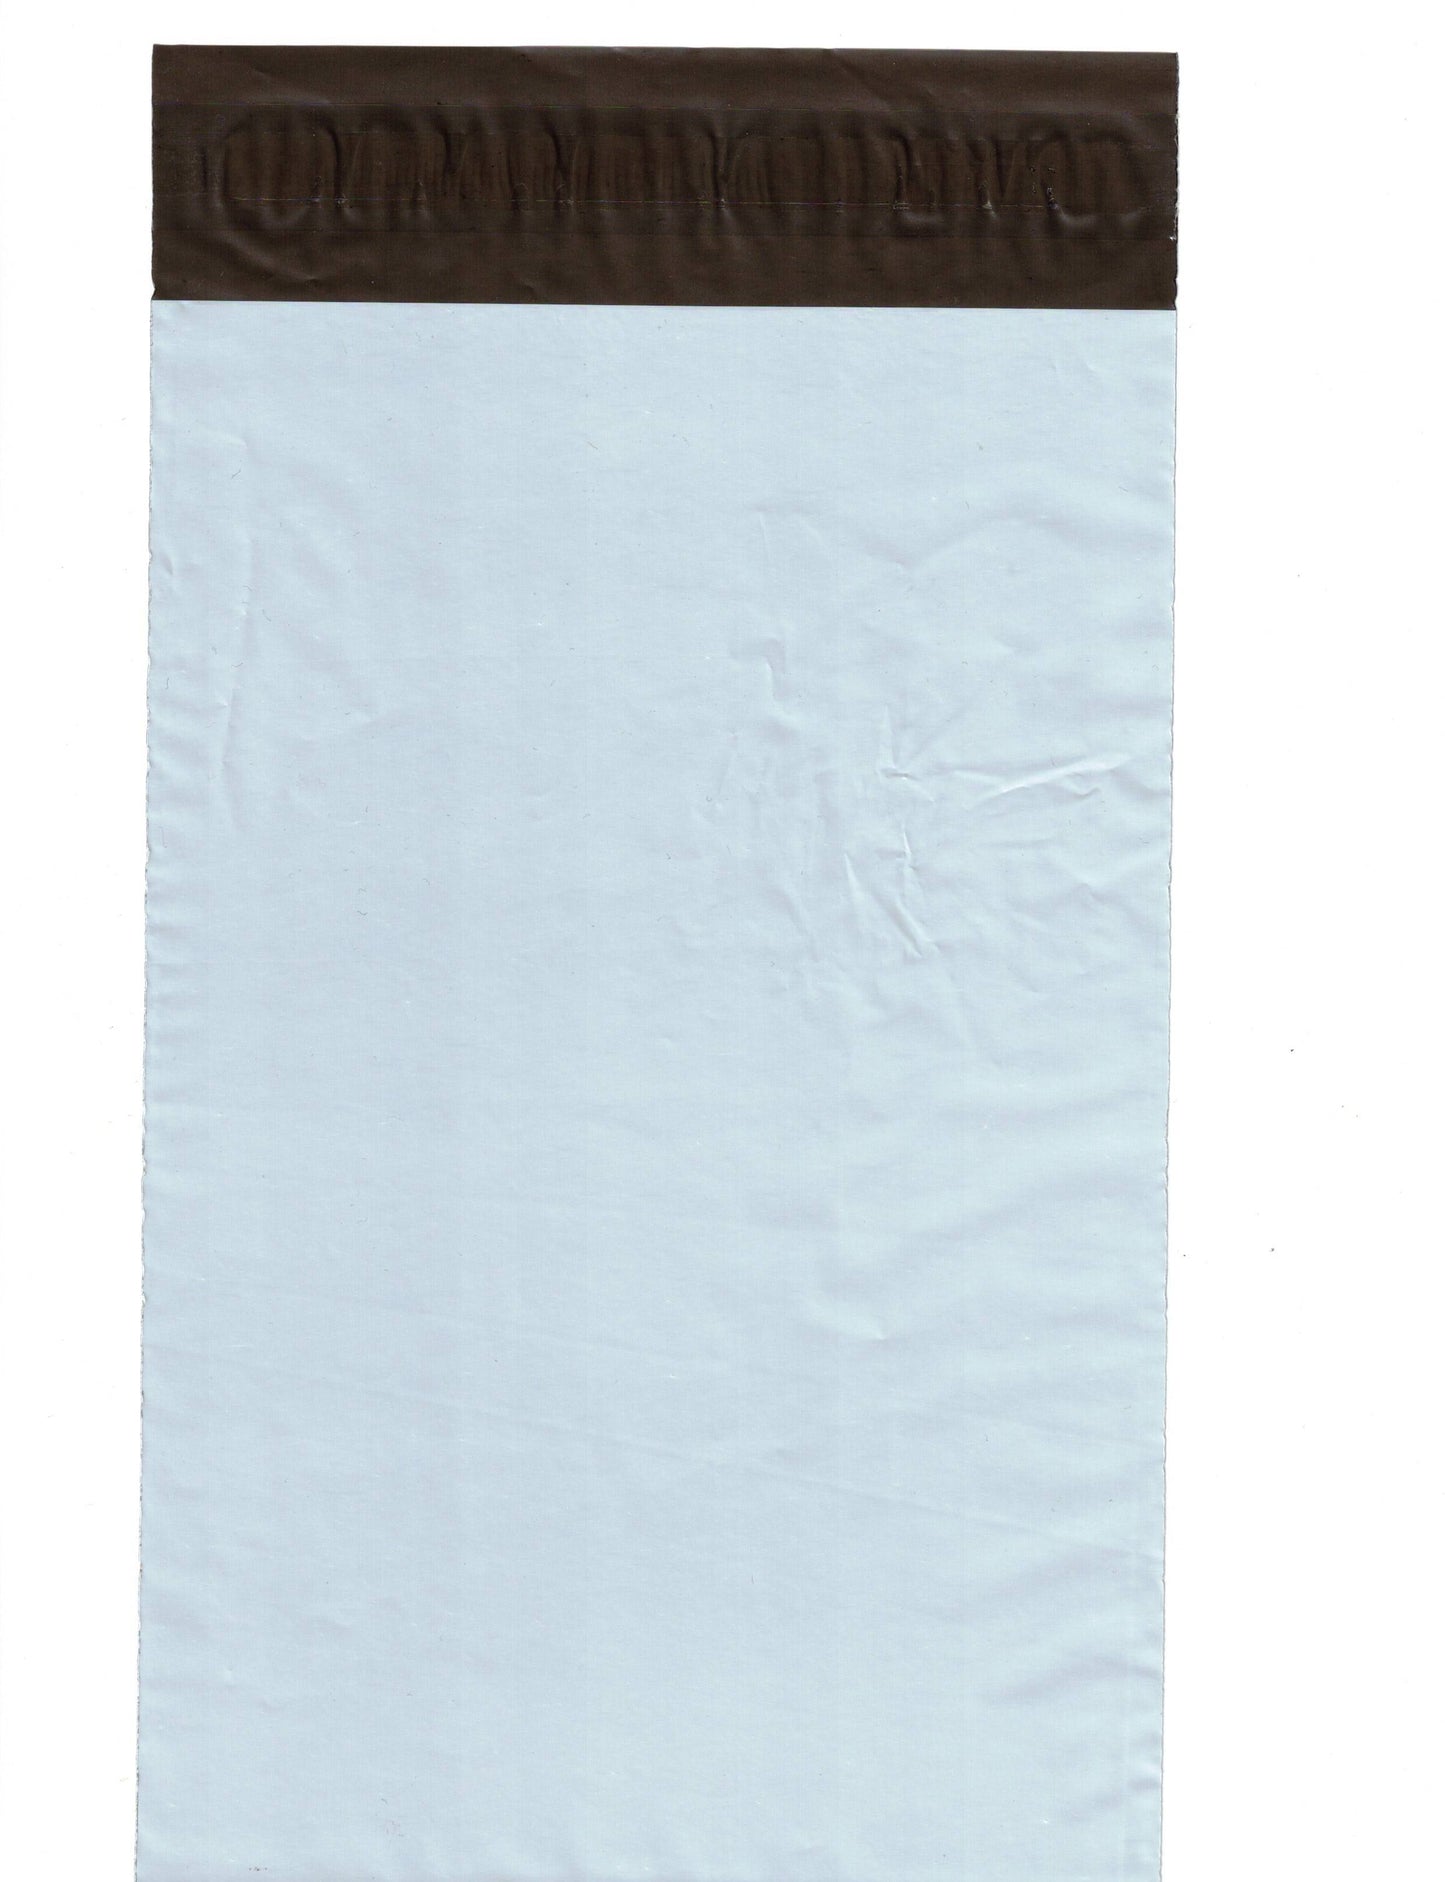 2 Pack 12.5"x15" oly Mailer, Sets of 100 (White/Gray) - Self Sealing Mailing Bag Strong & Opaque